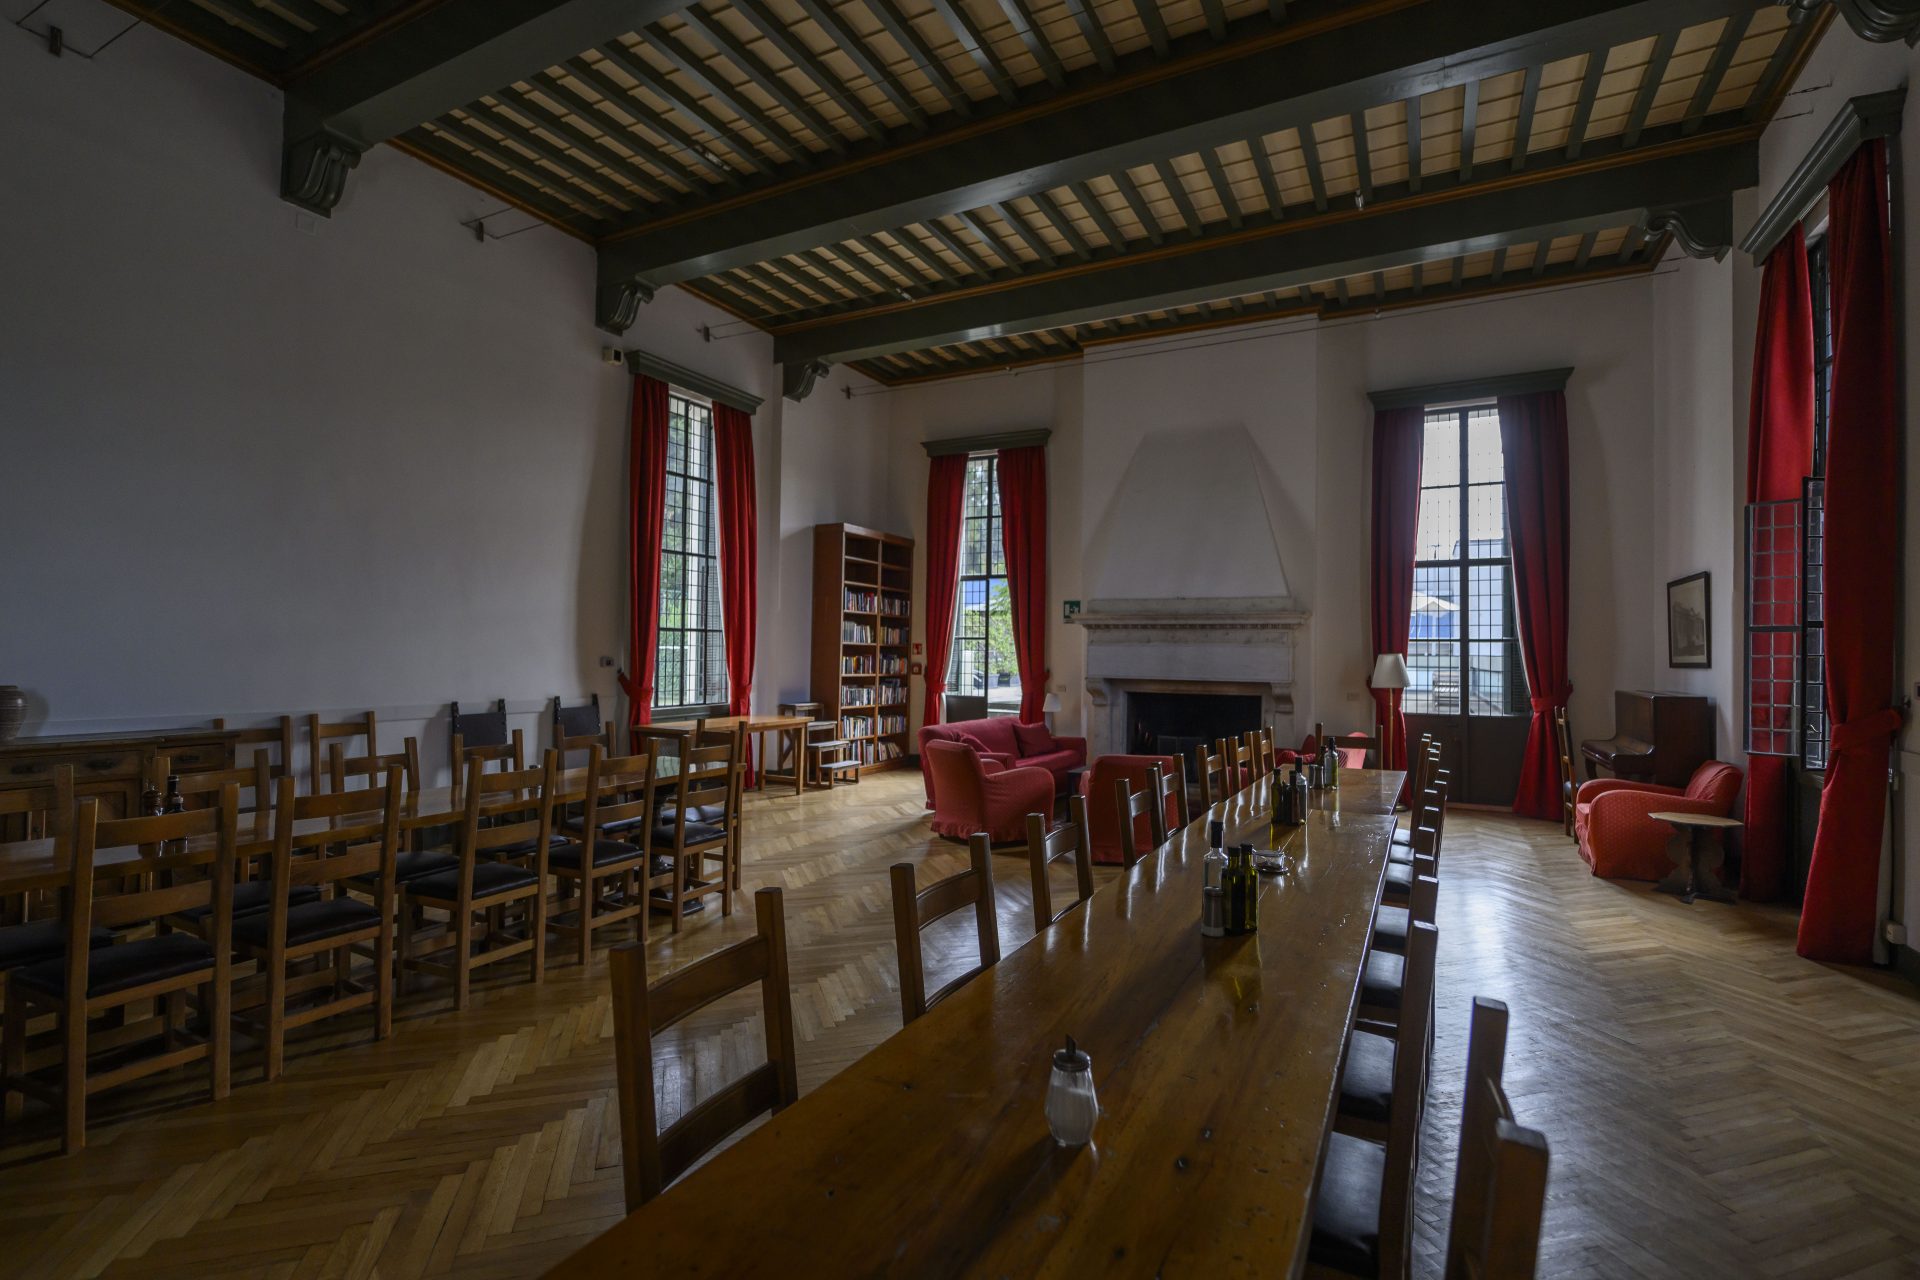 Dinner Room at the British School at Rome, October 2023. Photo by Antonio Masiello.